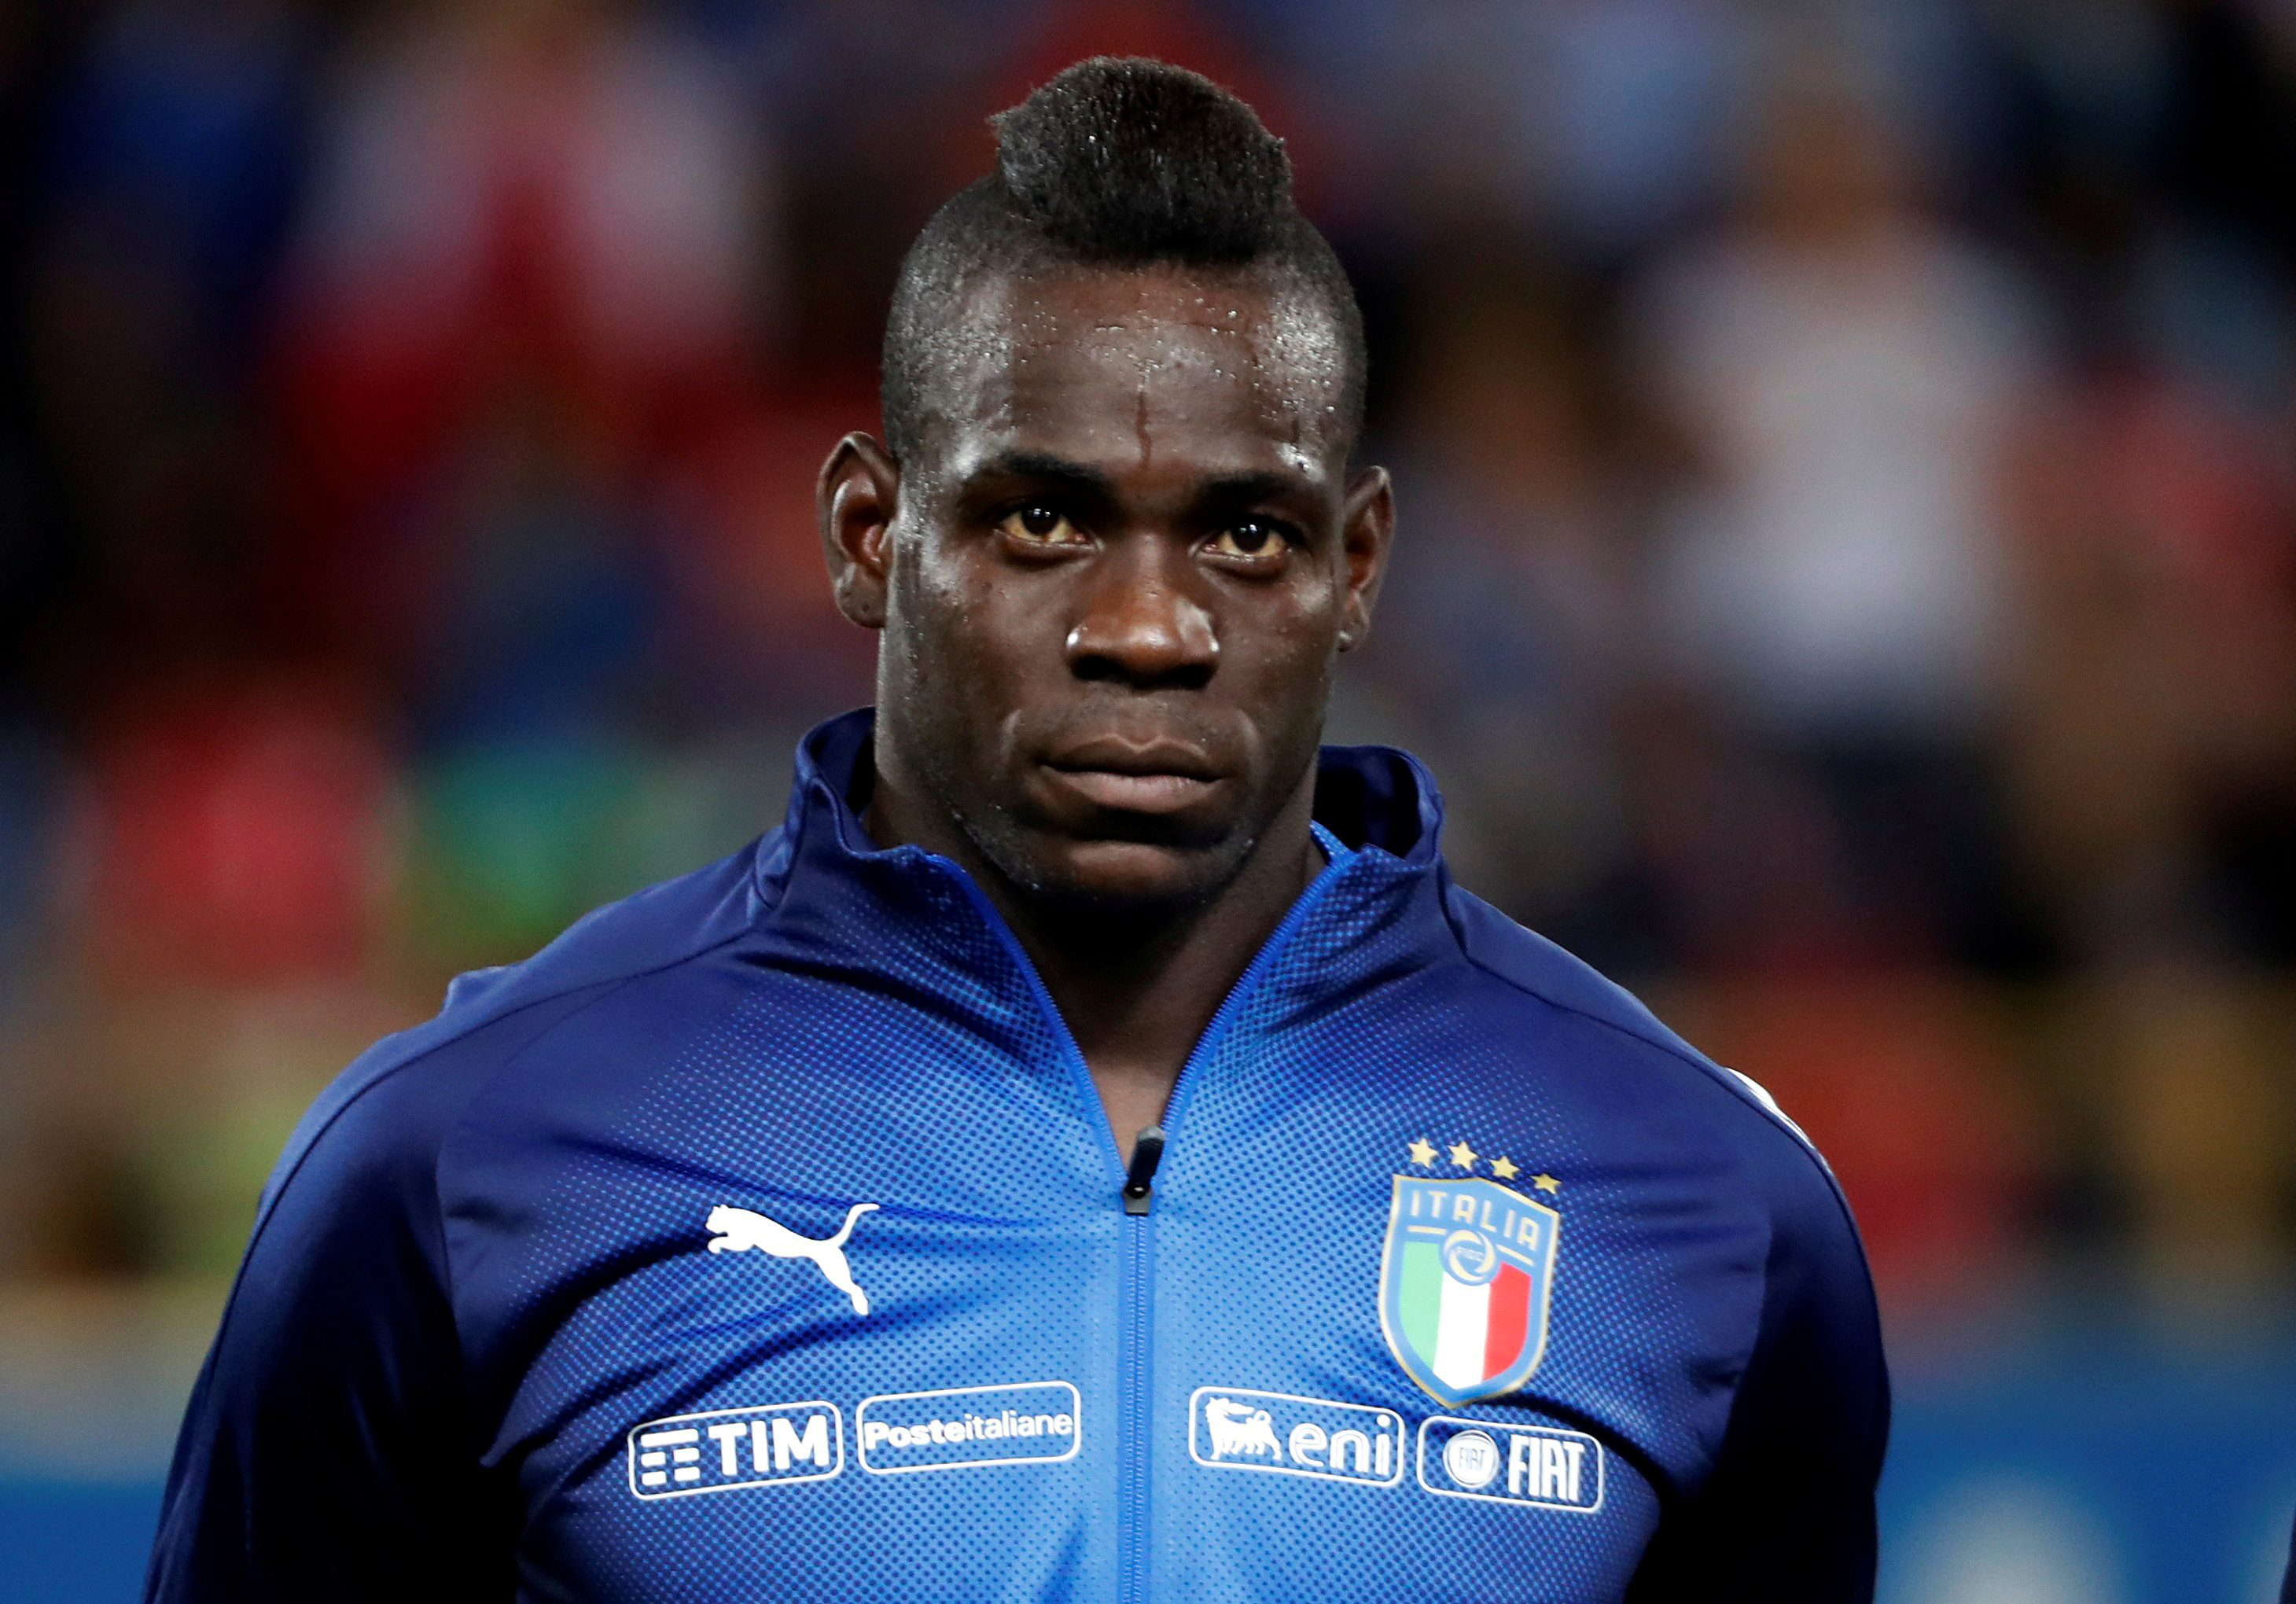 Football: Balotelli will get Italy recall when in form - Mancini